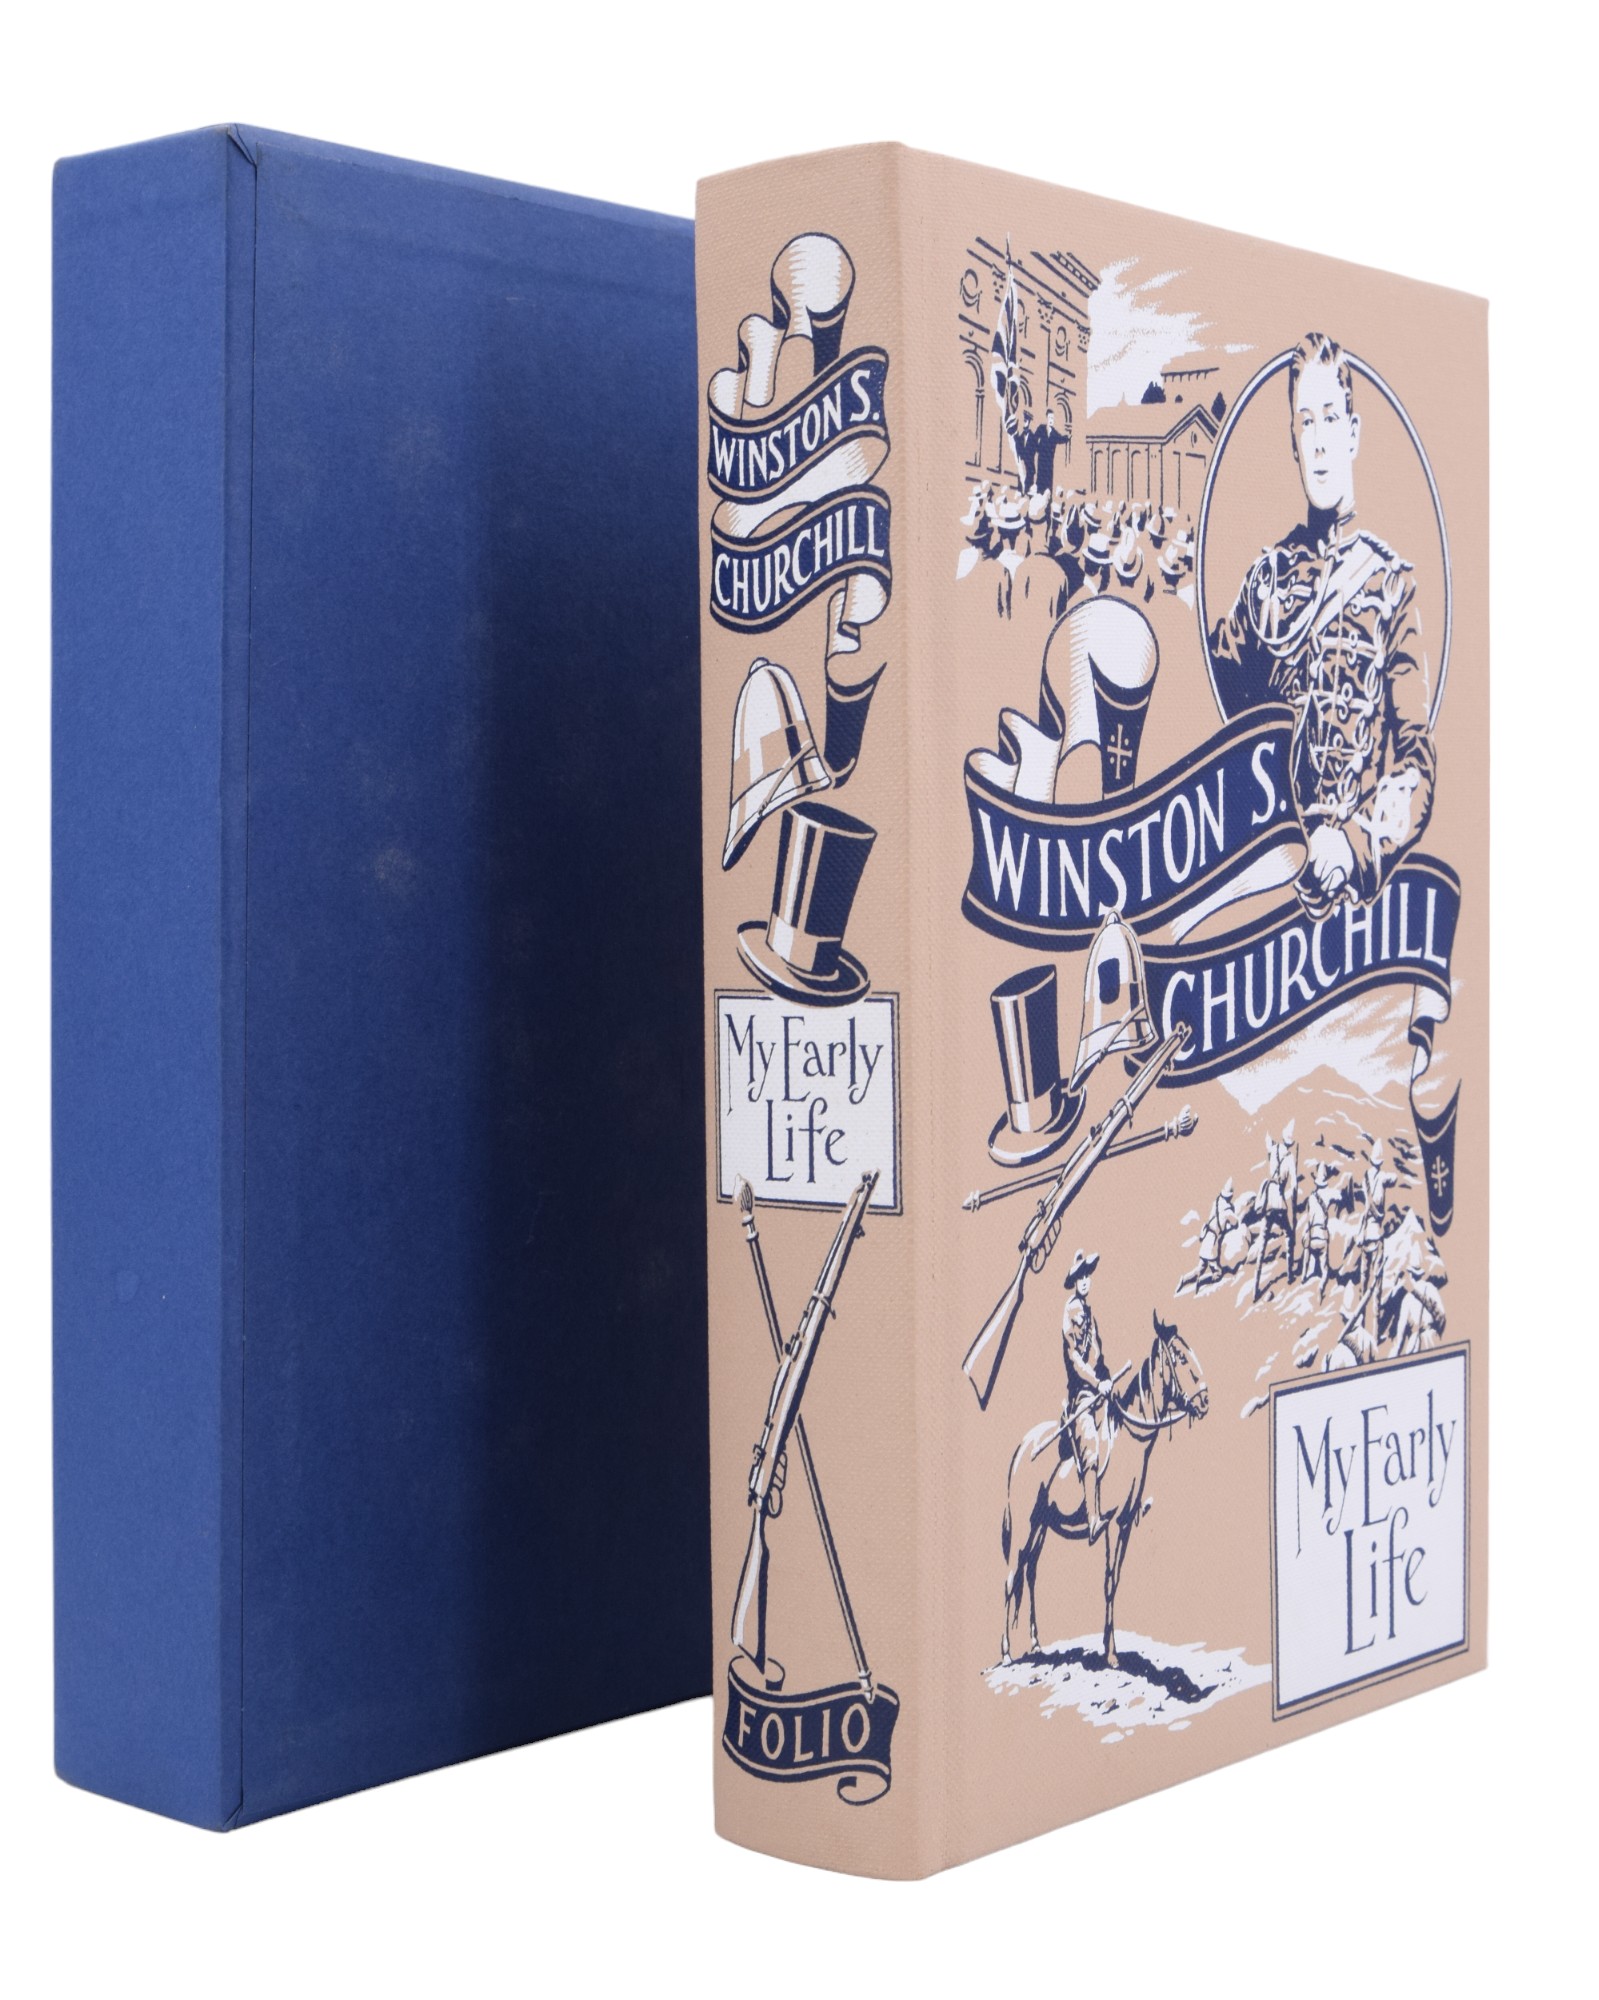 Seven Folio Society publications in slip cases, including Frances Wood, "The Silk Road", 2002; - Image 8 of 31